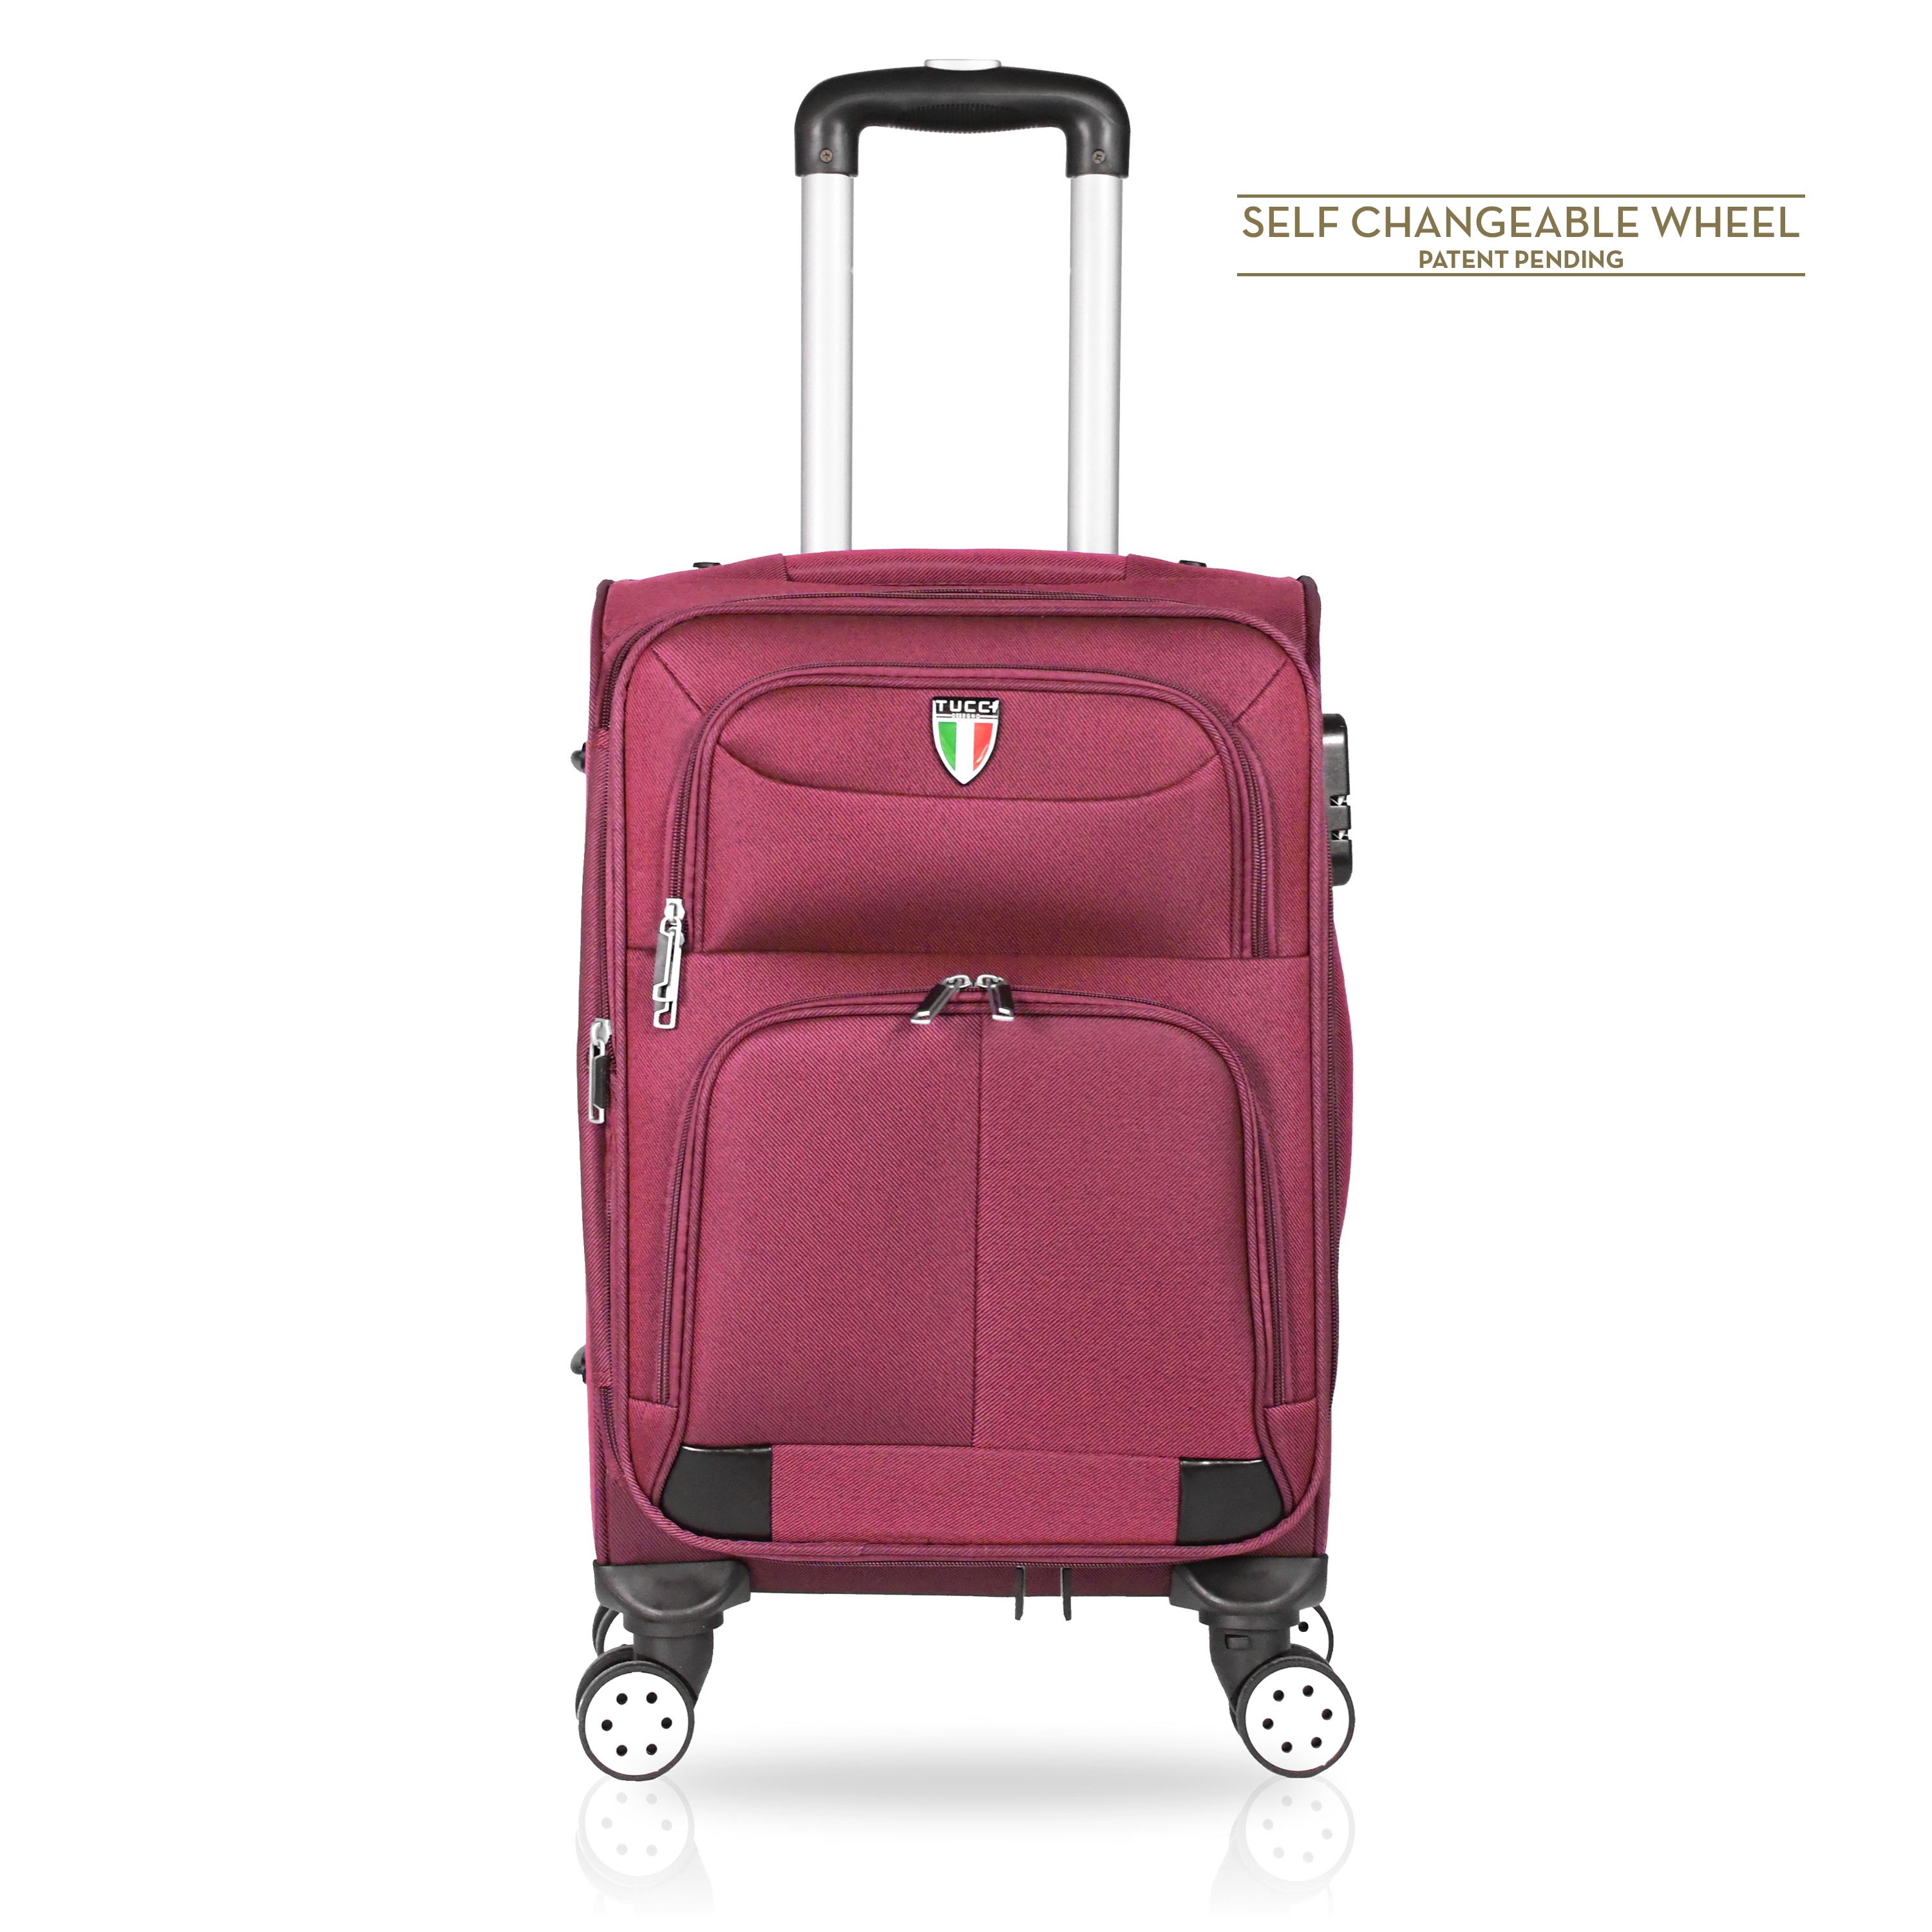 TUCCI Italy STRATI 32" Soft Touch Travel Luggage Suitcase